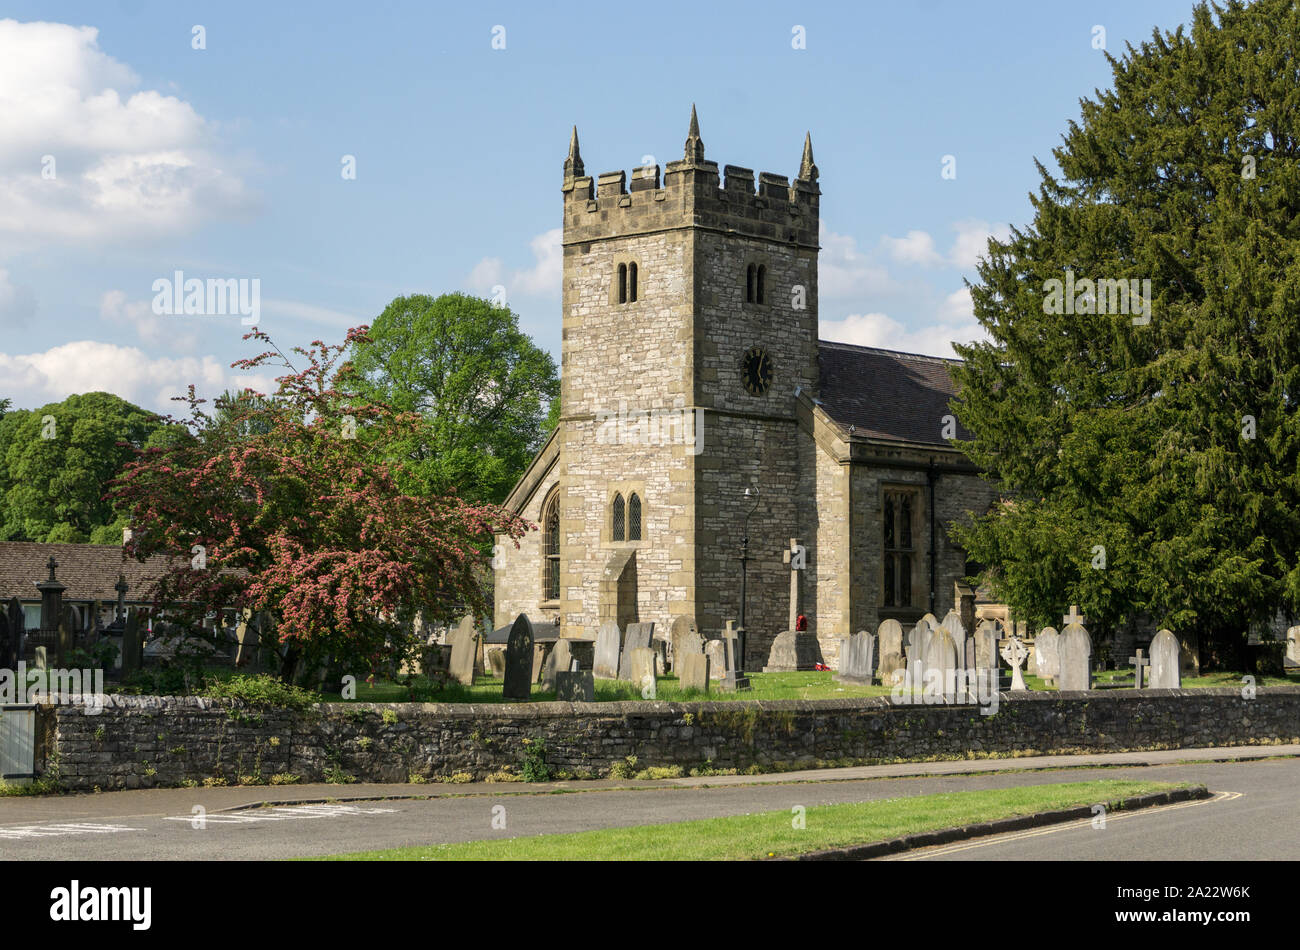 Exterior view of Holy Trinity church in the village of Ashford In The Water, Derbyshire, UK; dates from 12th century but  rebuilt in 19th century. Stock Photo